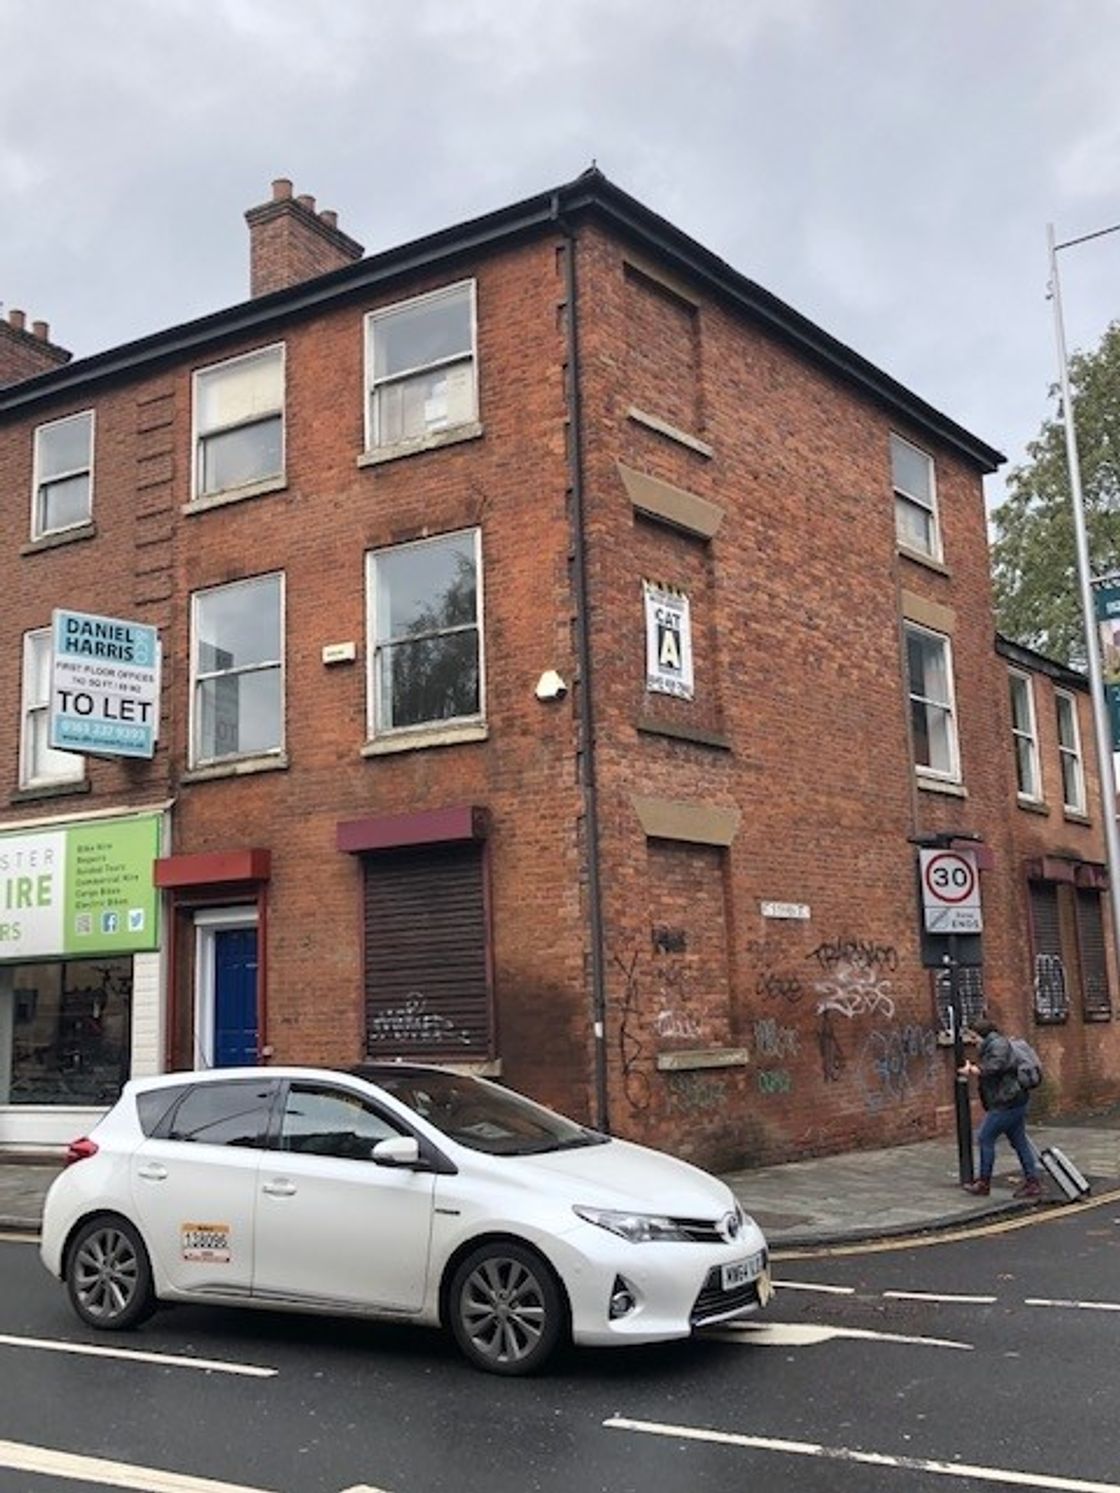 196 Chapel St, Salford M3 6BY